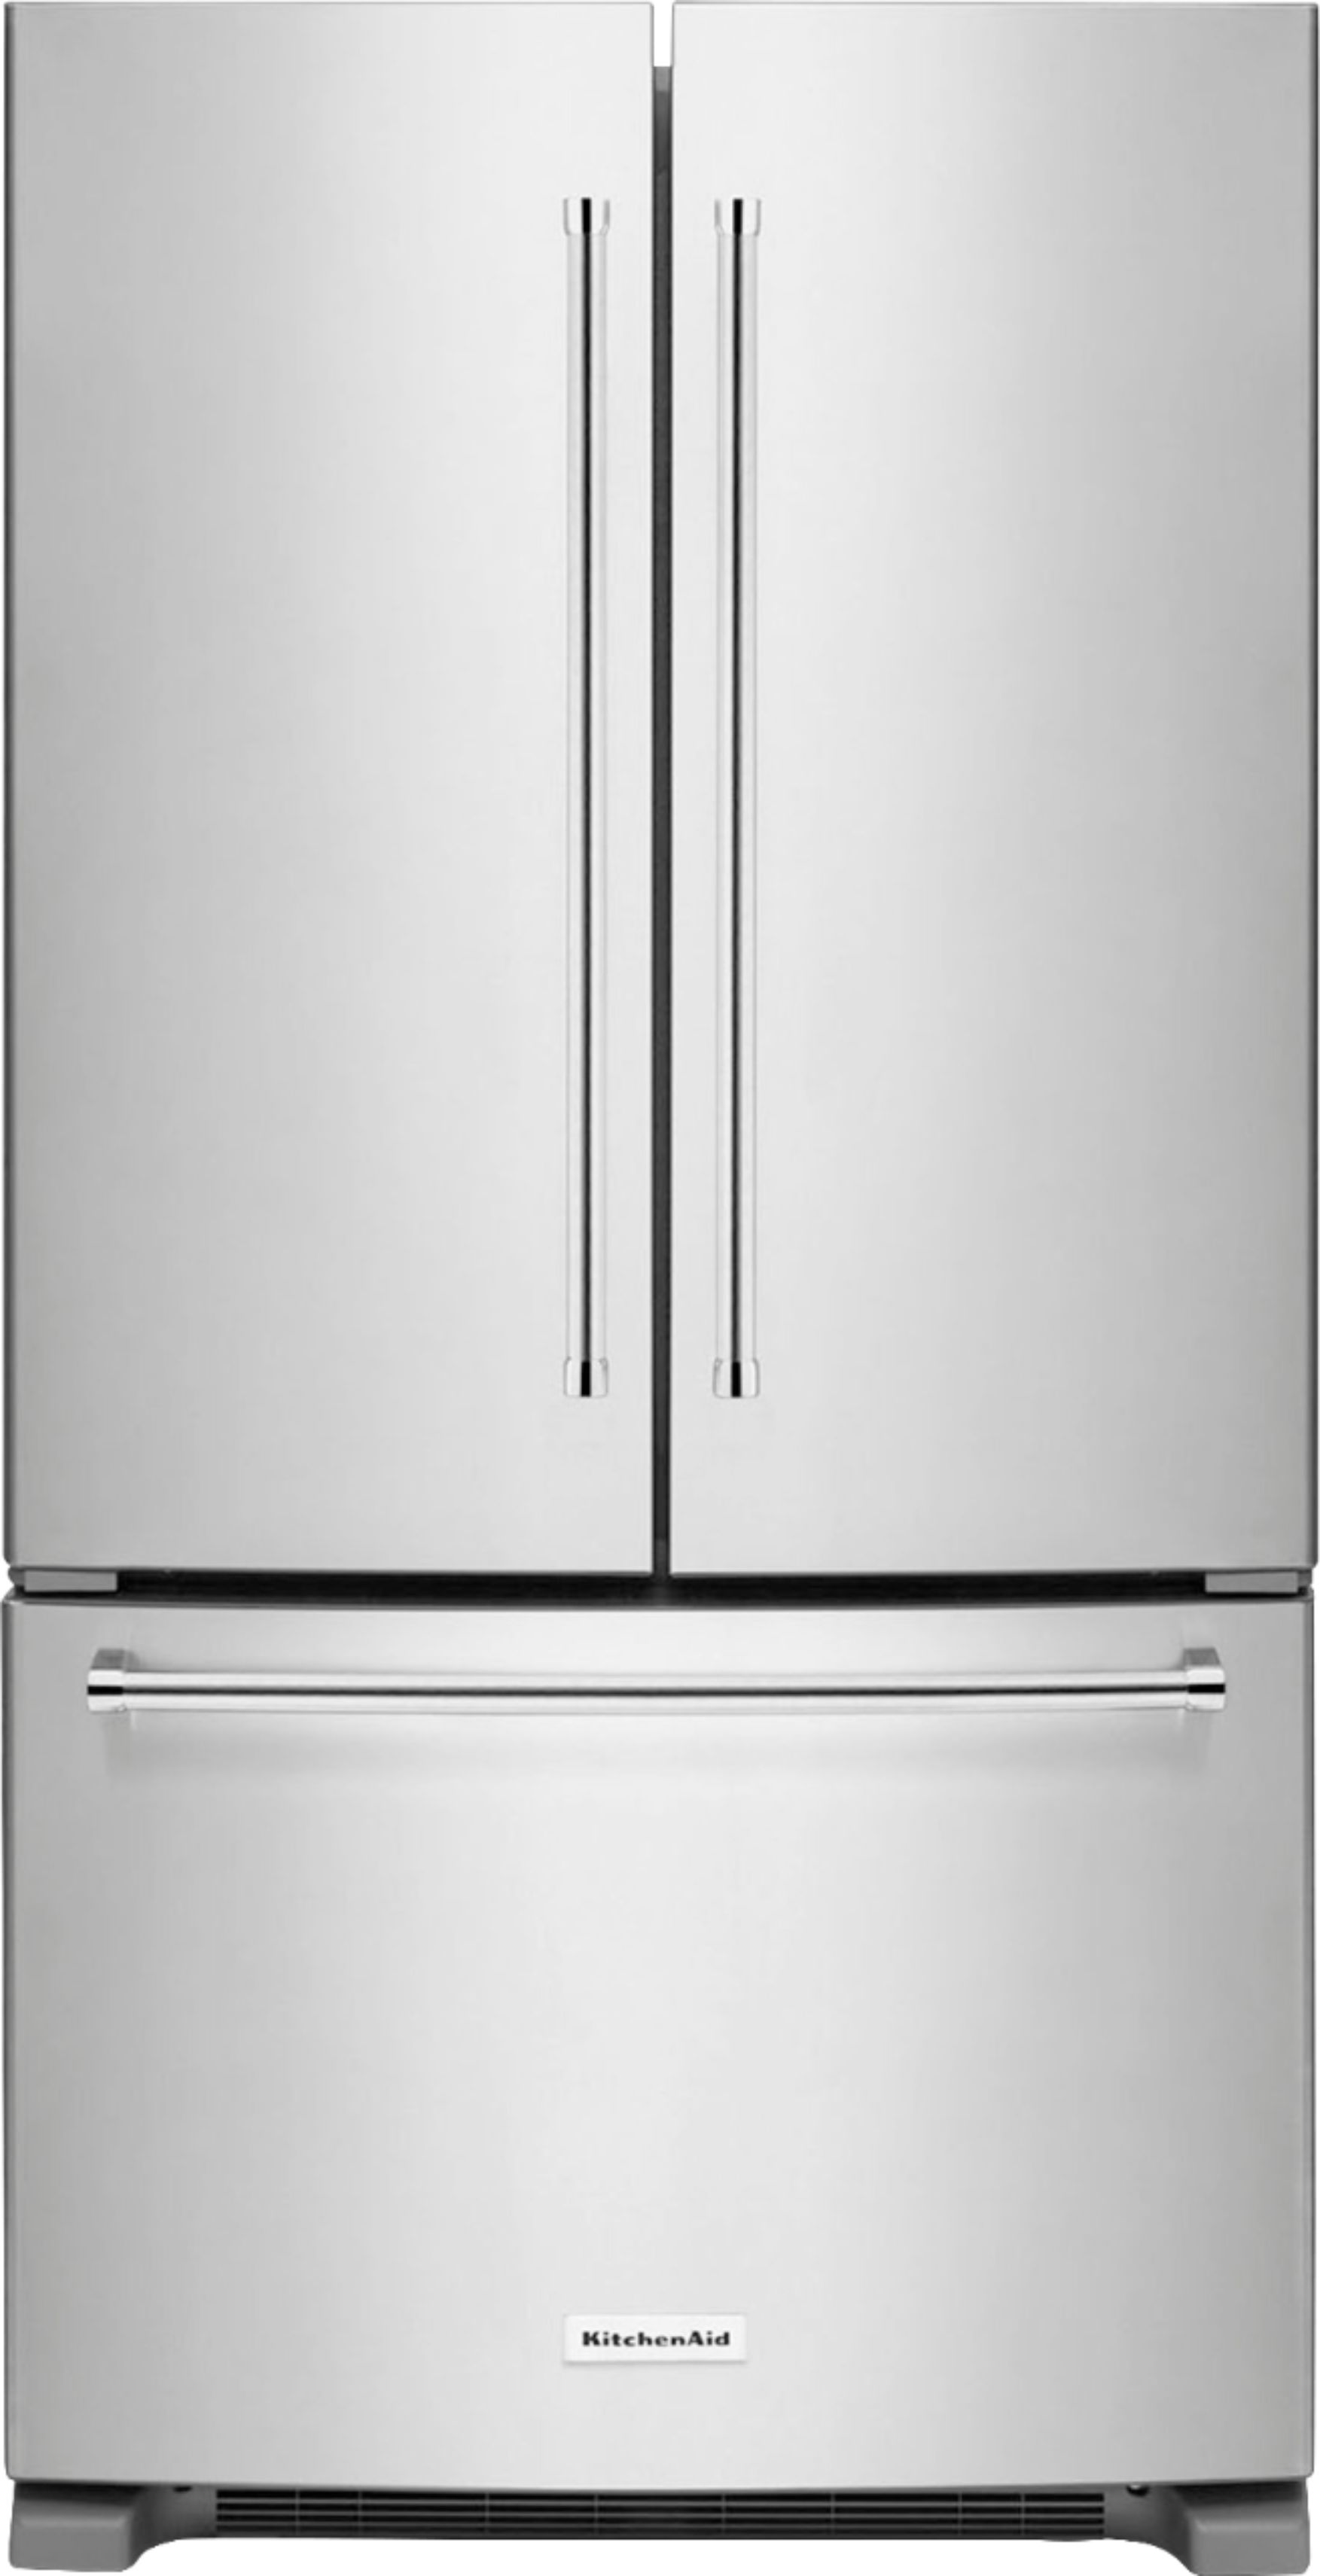 KitchenAid   20 Cu. Ft. French Door Counter Depth Refrigerator   Stainless  steel